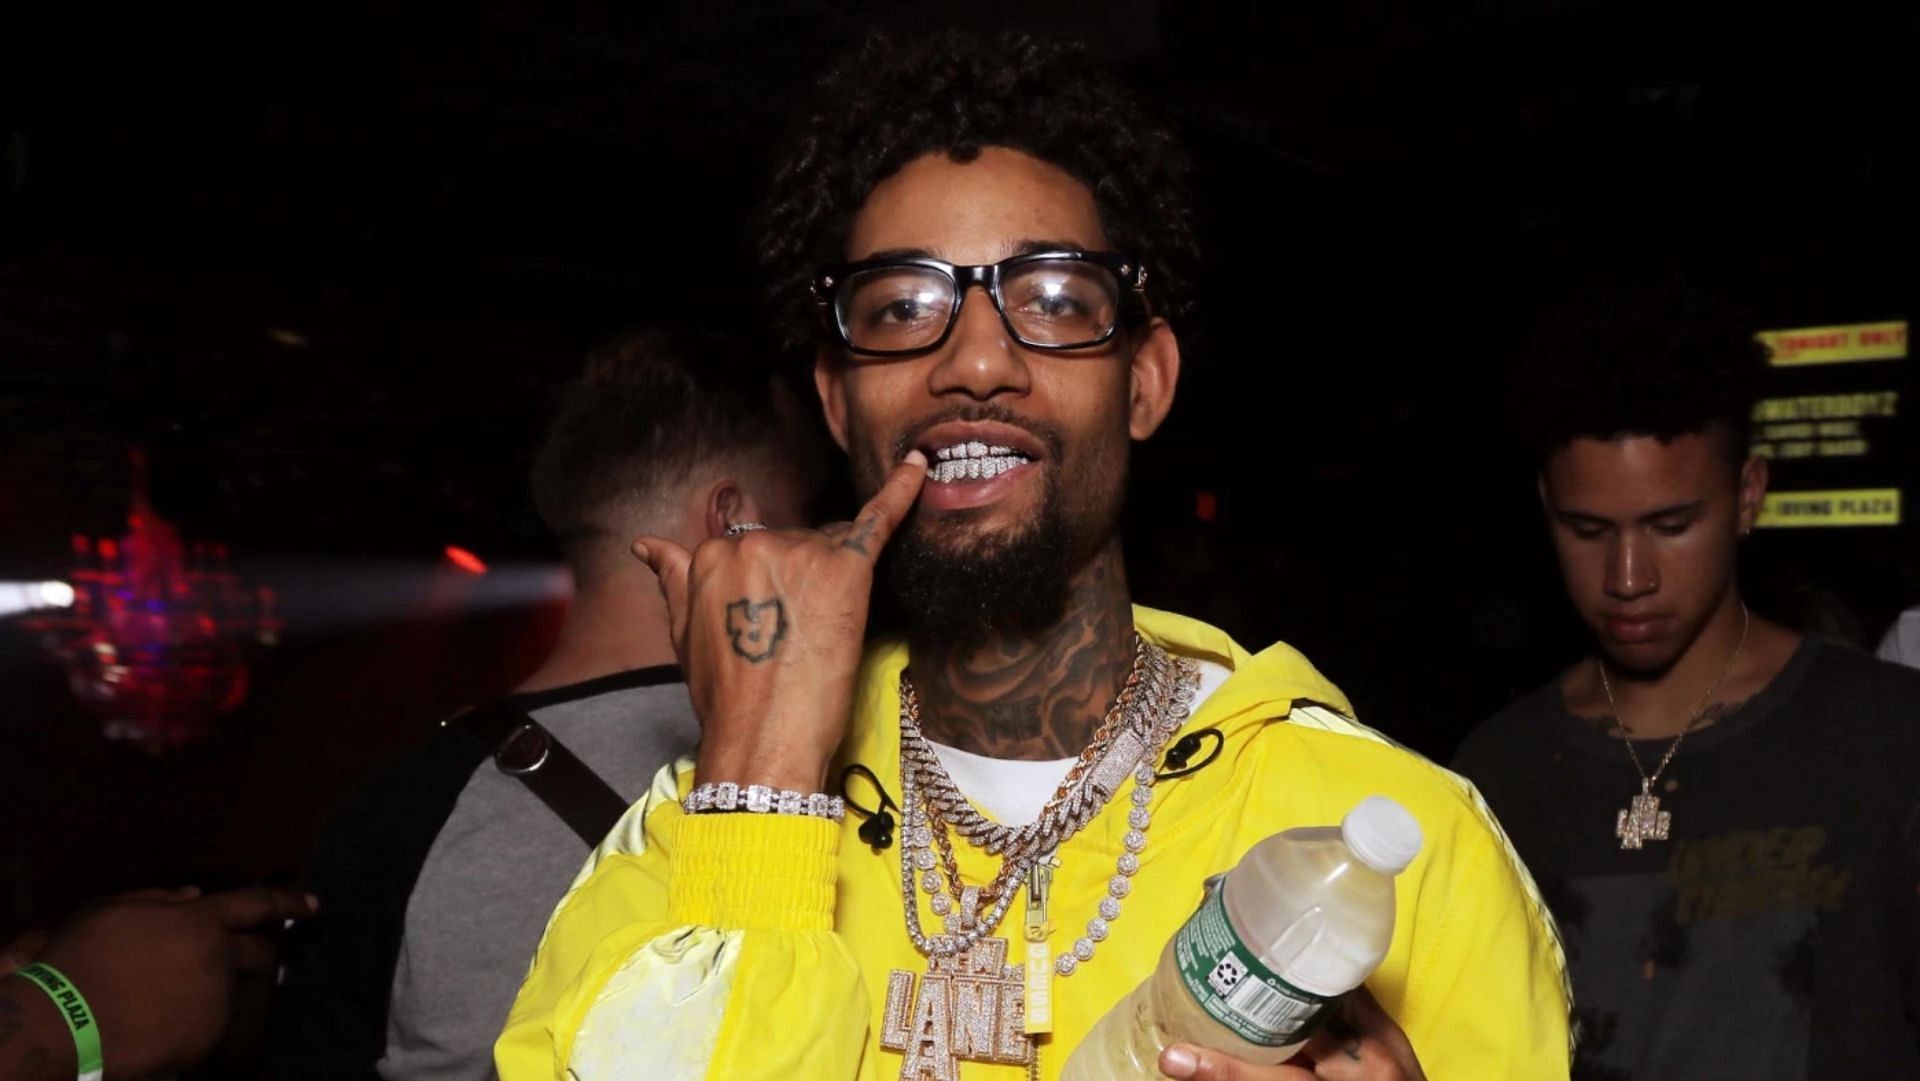 PnB Rock was a father to two daughters. (Image via Johnny Nunez/Getty)